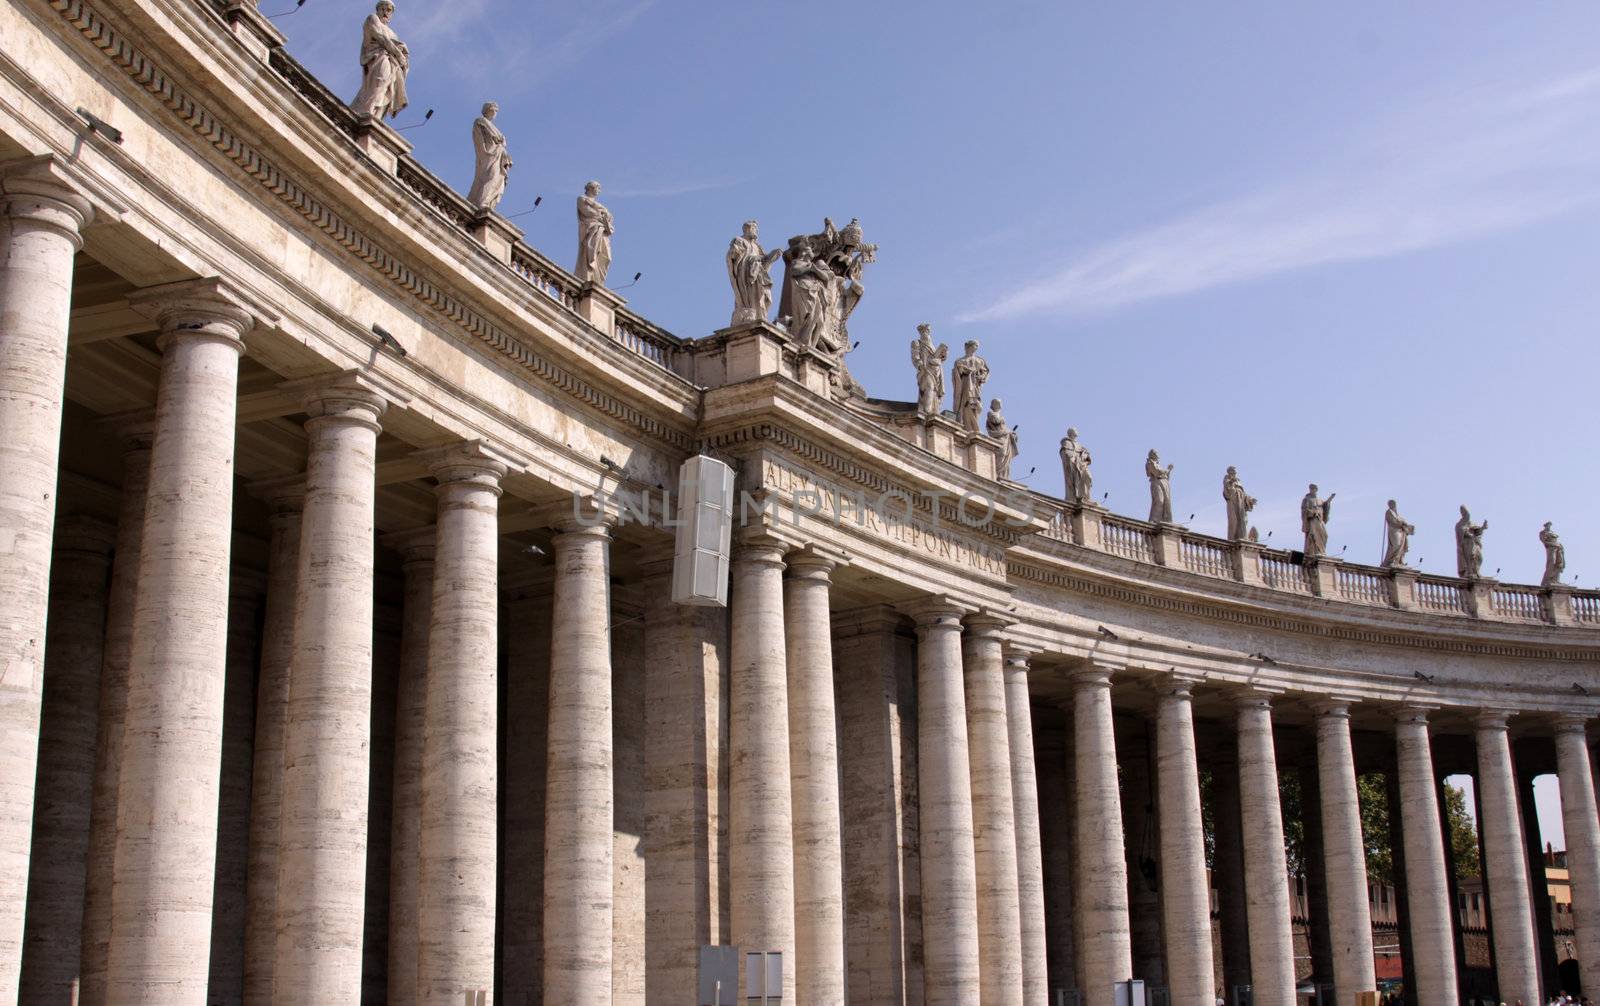 Saint Peter's Square Colonnade by ca2hill